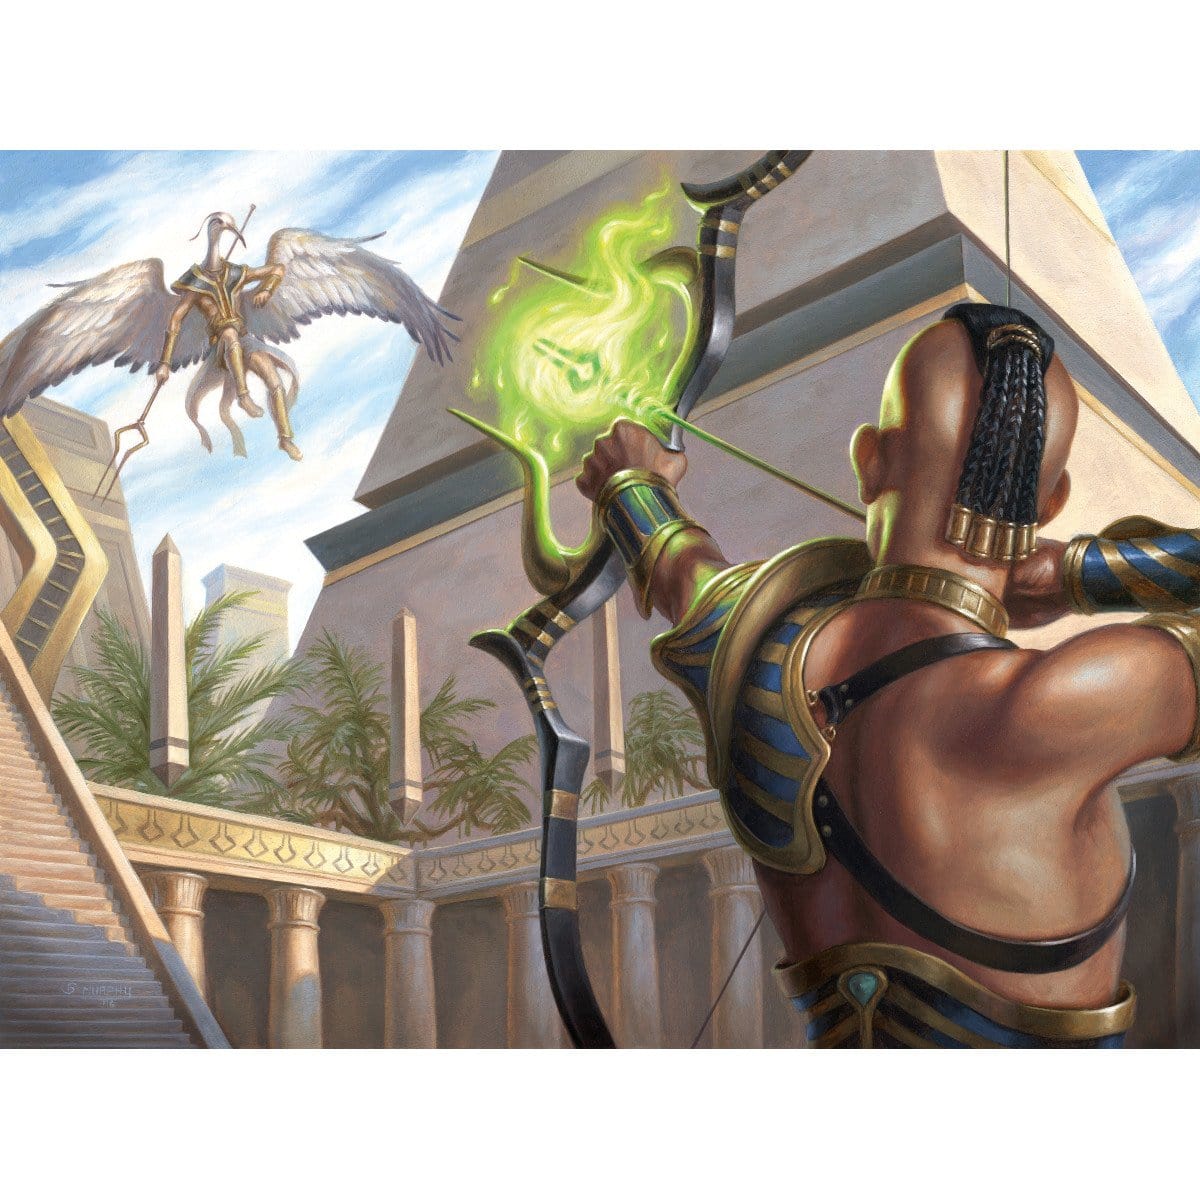 Stinging Shot Print - Print - Original Magic Art - Accessories for Magic the Gathering and other card games